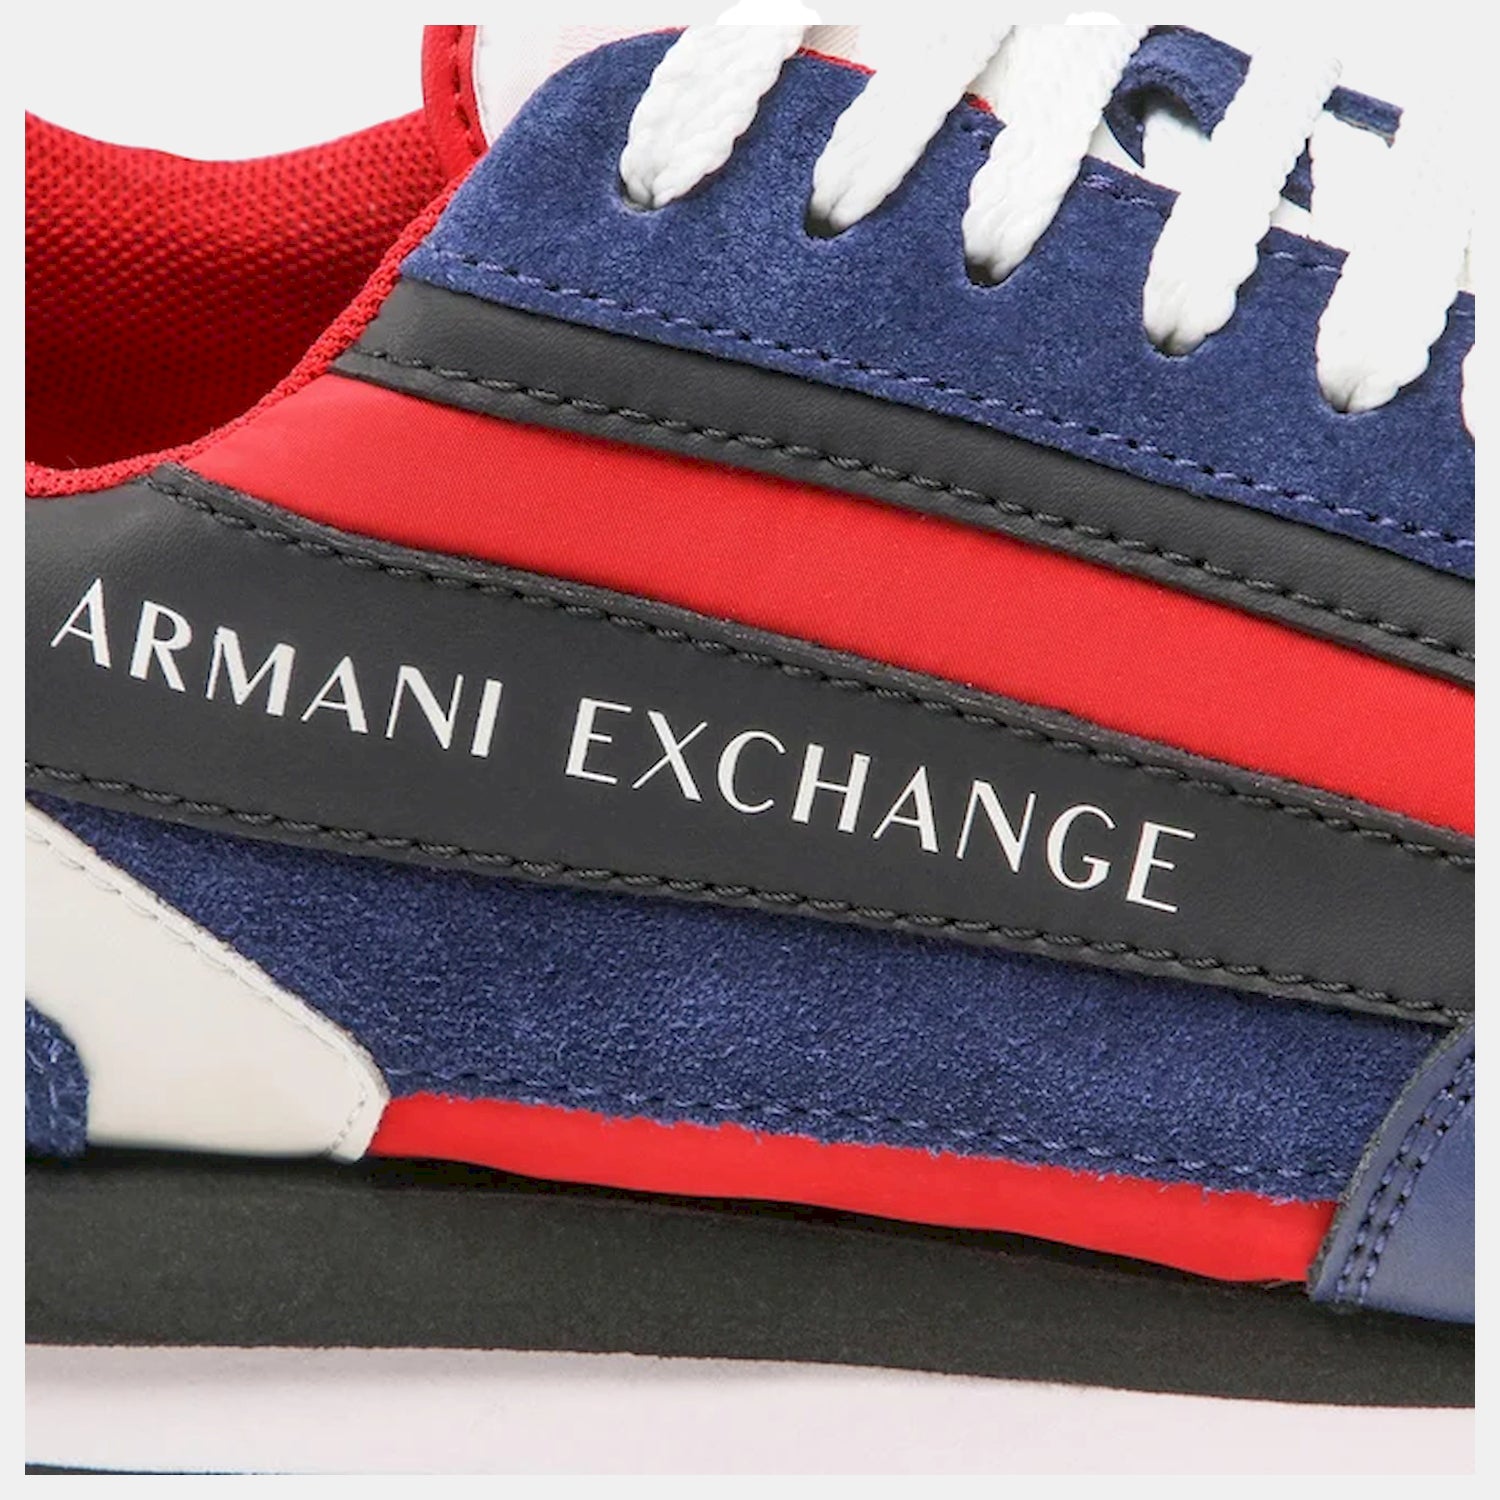 Armani Exchange Sapatilhas Sneakers Shoes Xux101 Xv294 Navy Red Navy Vermelho_shot4